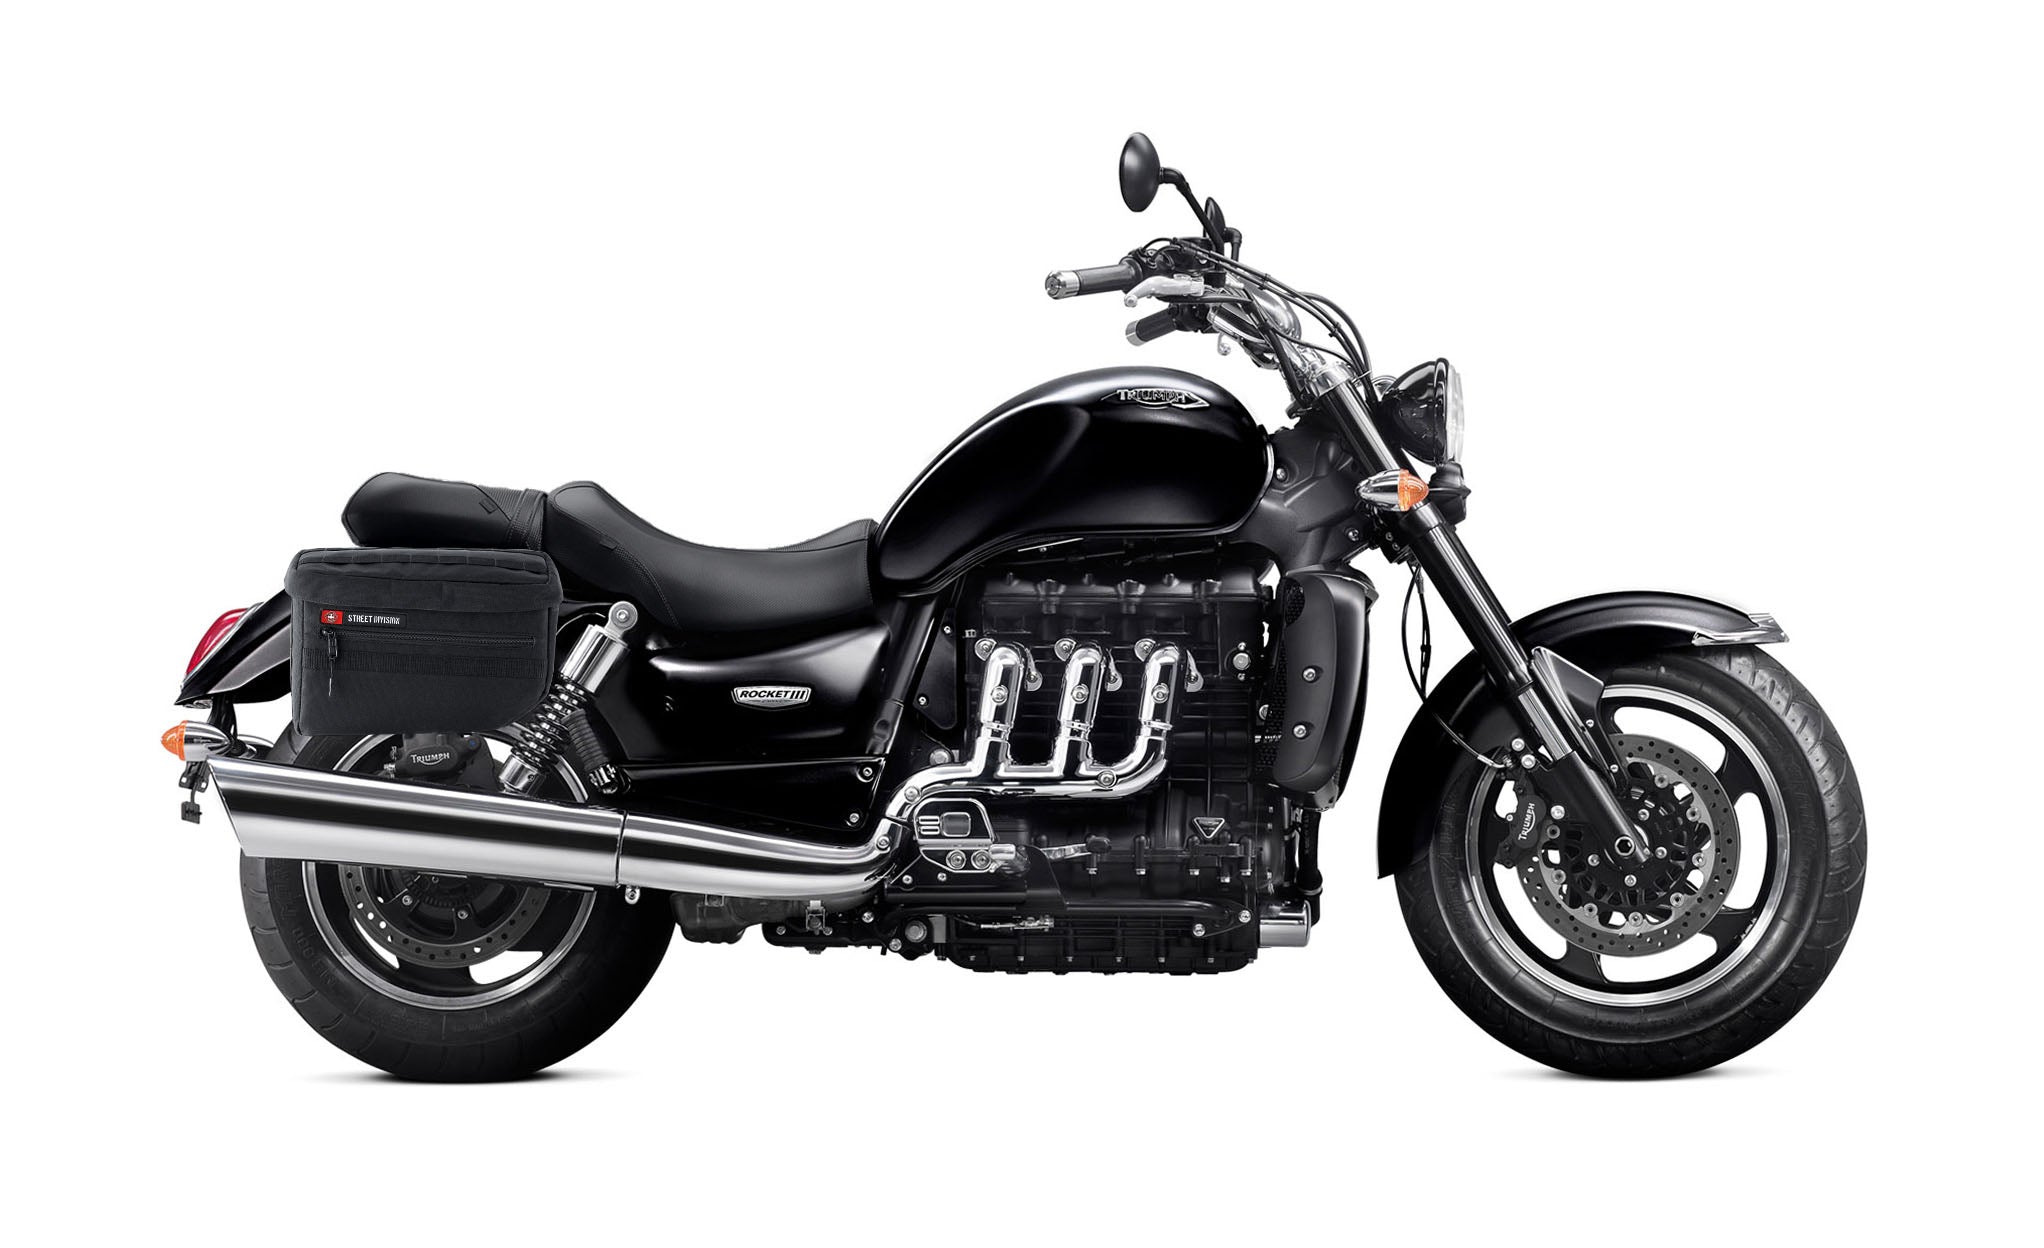 Viking Patriot Large Triumph Rocket Iii Classic Motorcycle Throw Over Saddlebags on Bike Photo @expand